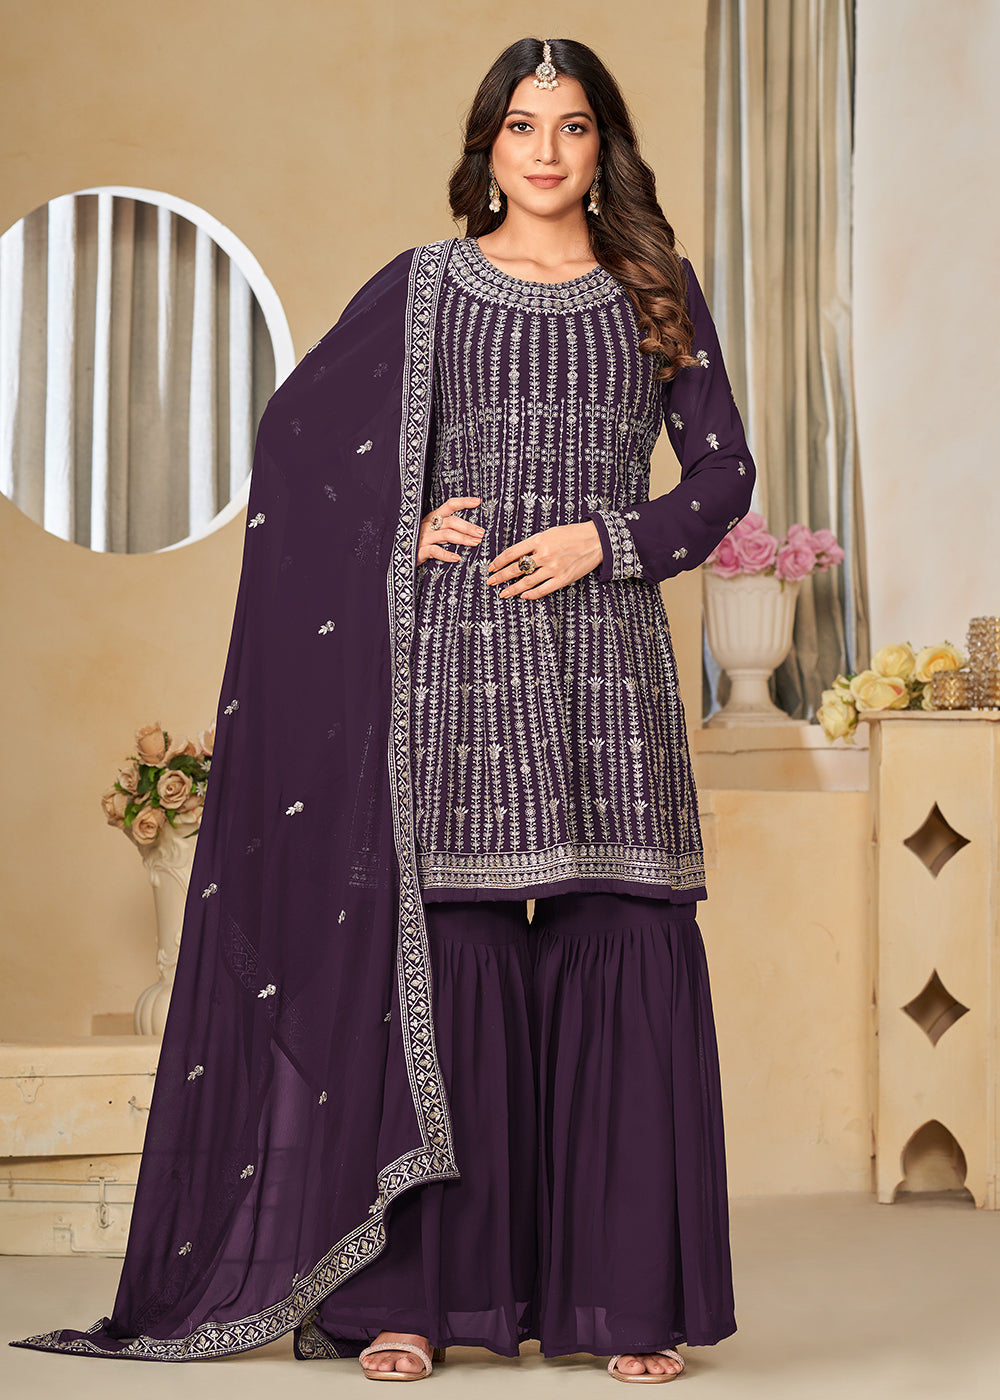 Shop Now Faux Georgette Purple Embroidered Gharara Style Suit Online at Empress Clothing in USA, UK, Canada, Italy & Worldwide. 